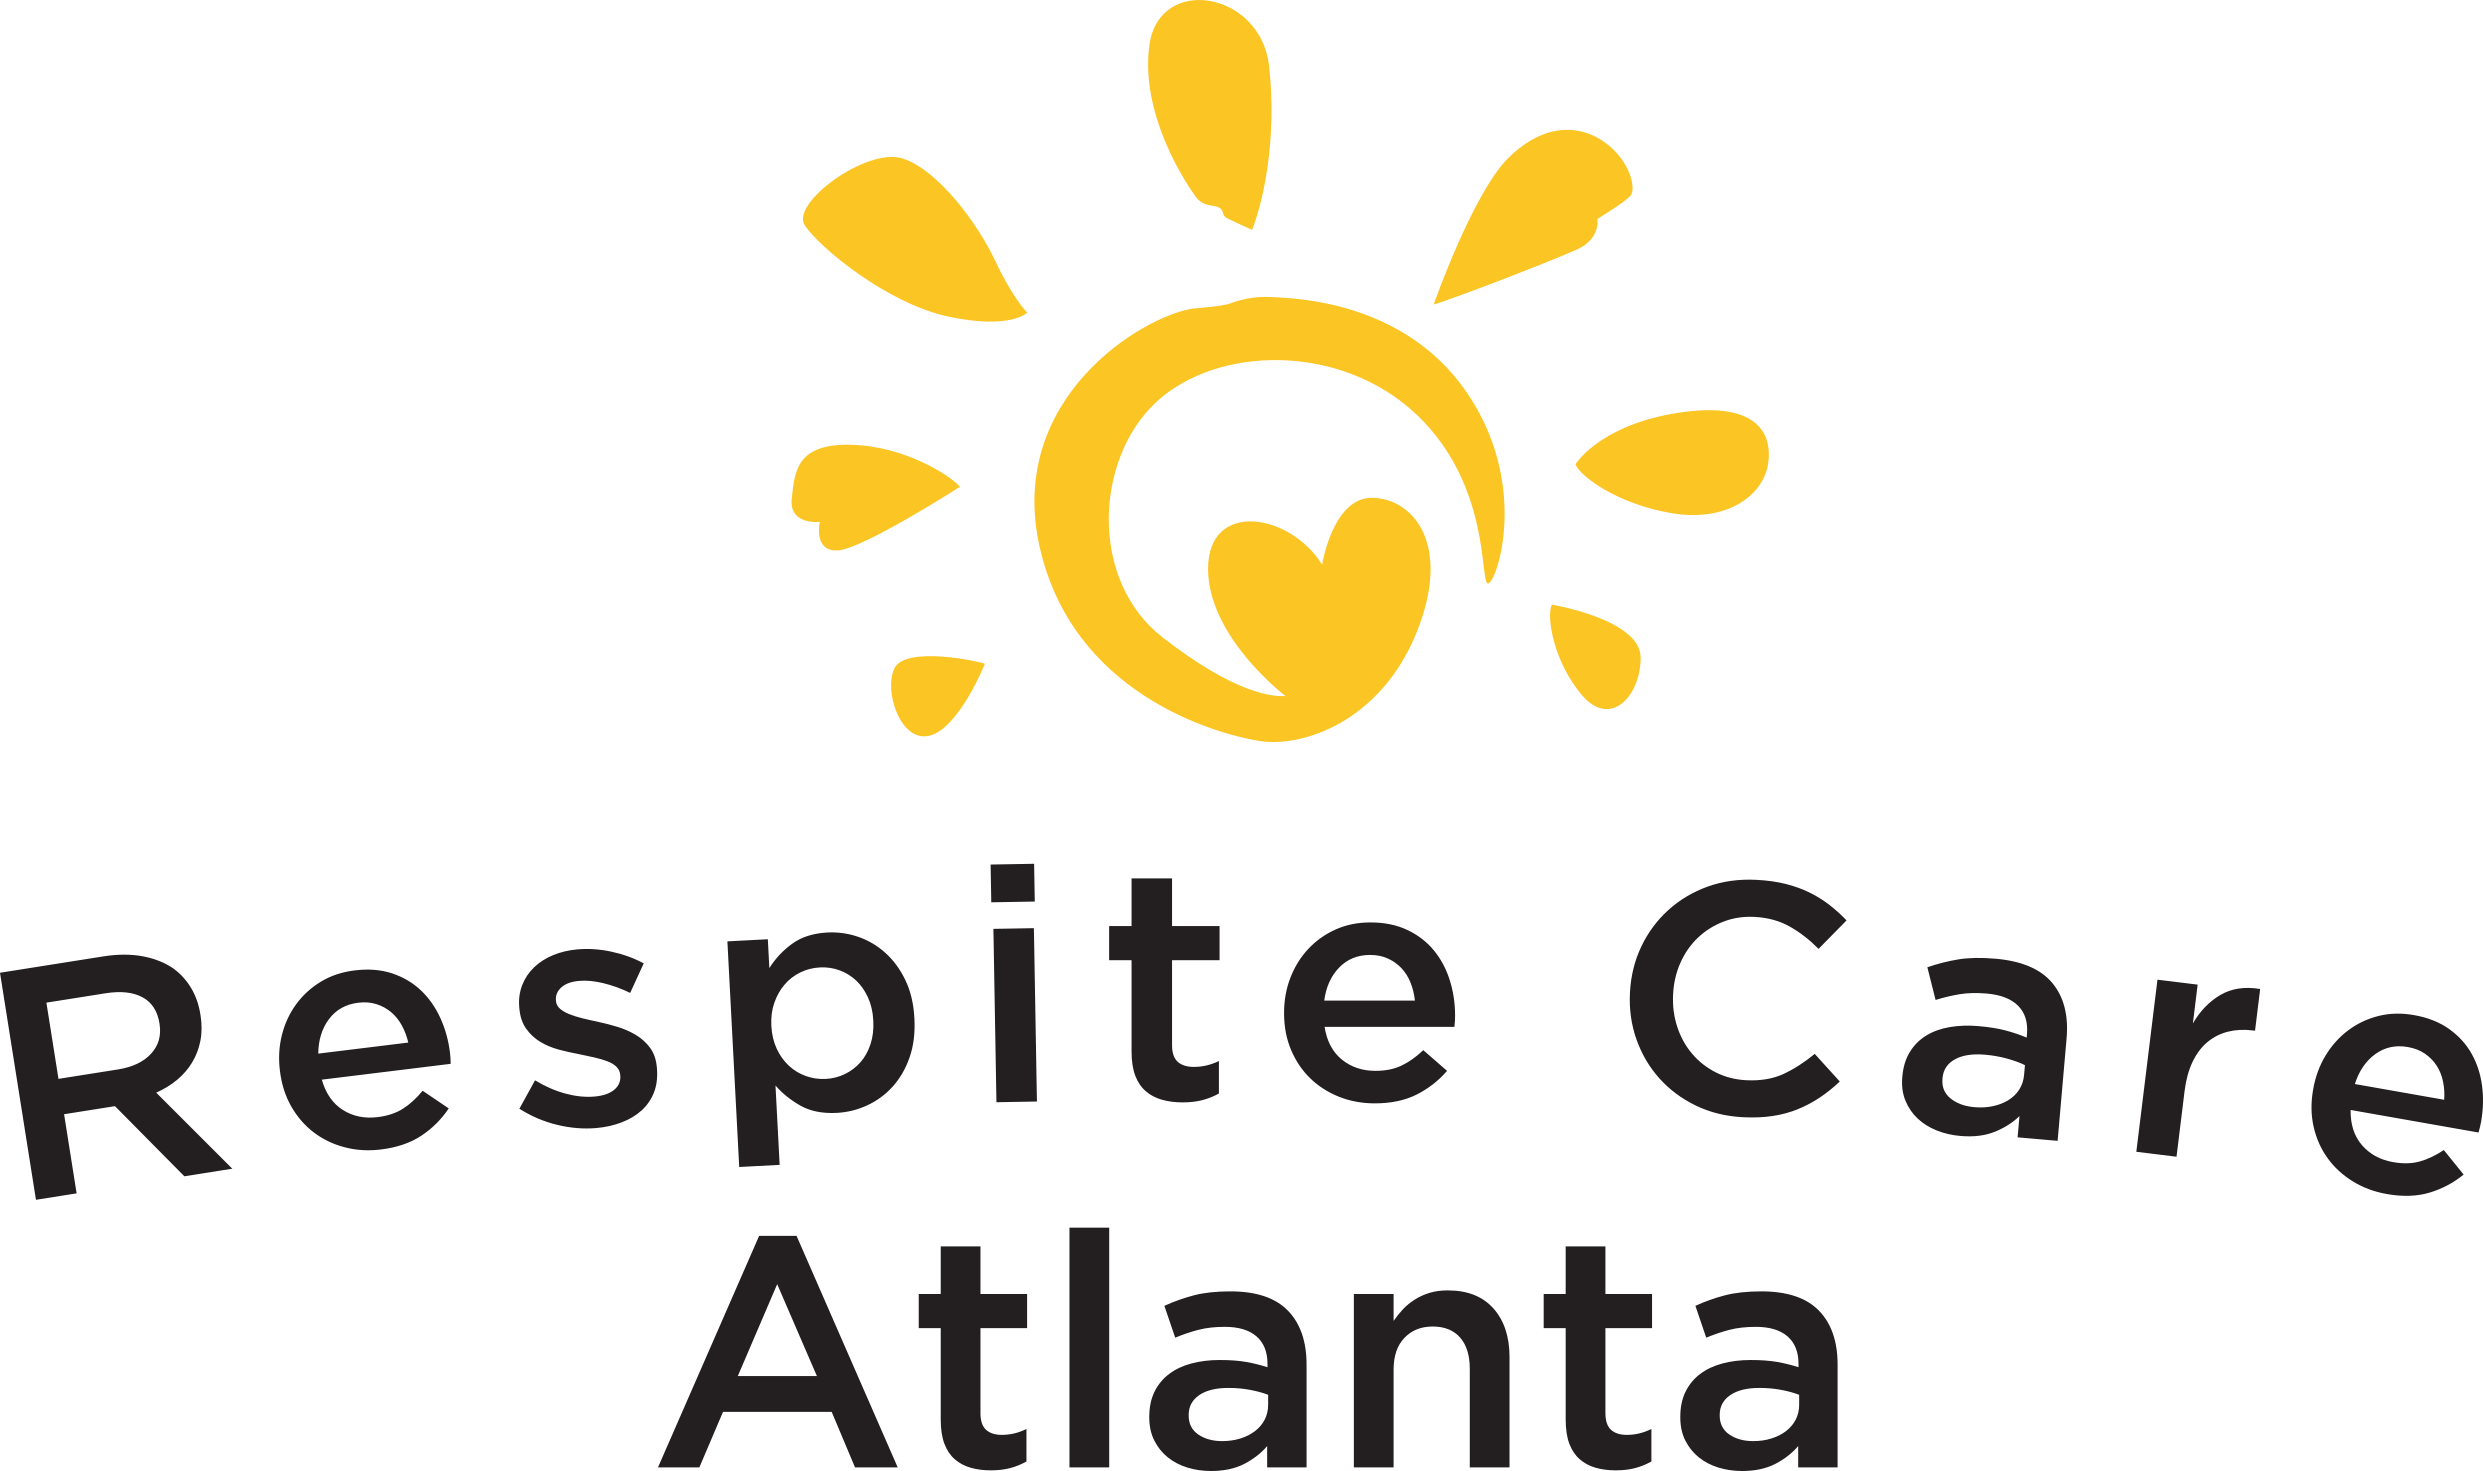 Respite Care Atlanta for seniors with Alzheimer's and other dementias